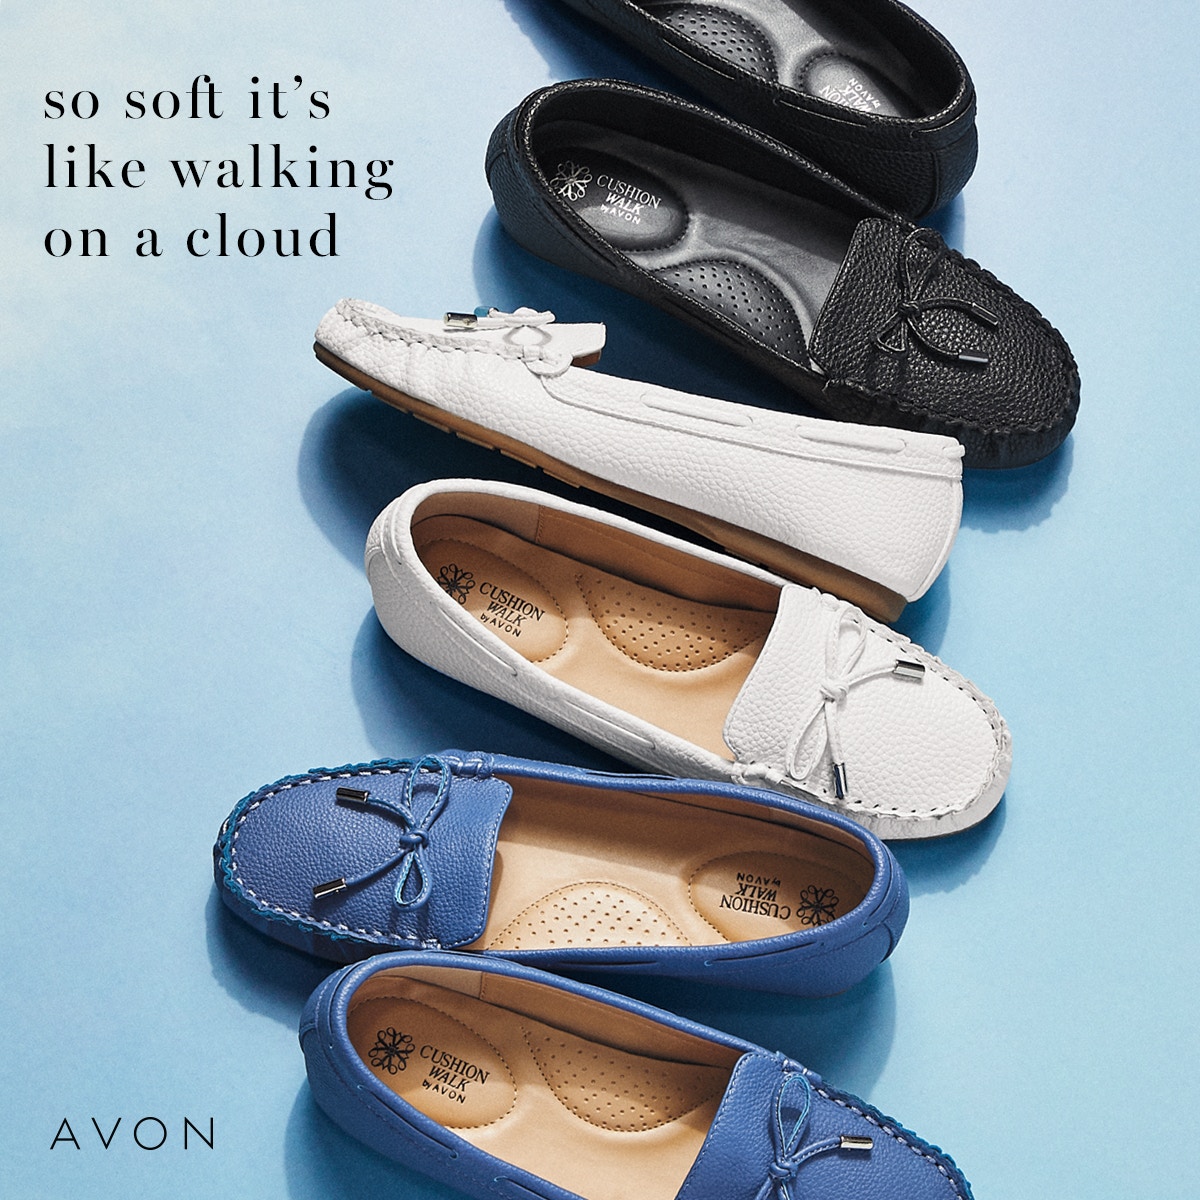 Walk on cloud nine with these adorable flats! They are fitted with Cushionwalk and are available in three different colors!

go.youravon.com/3kz6jg

#TuesdayShoesday